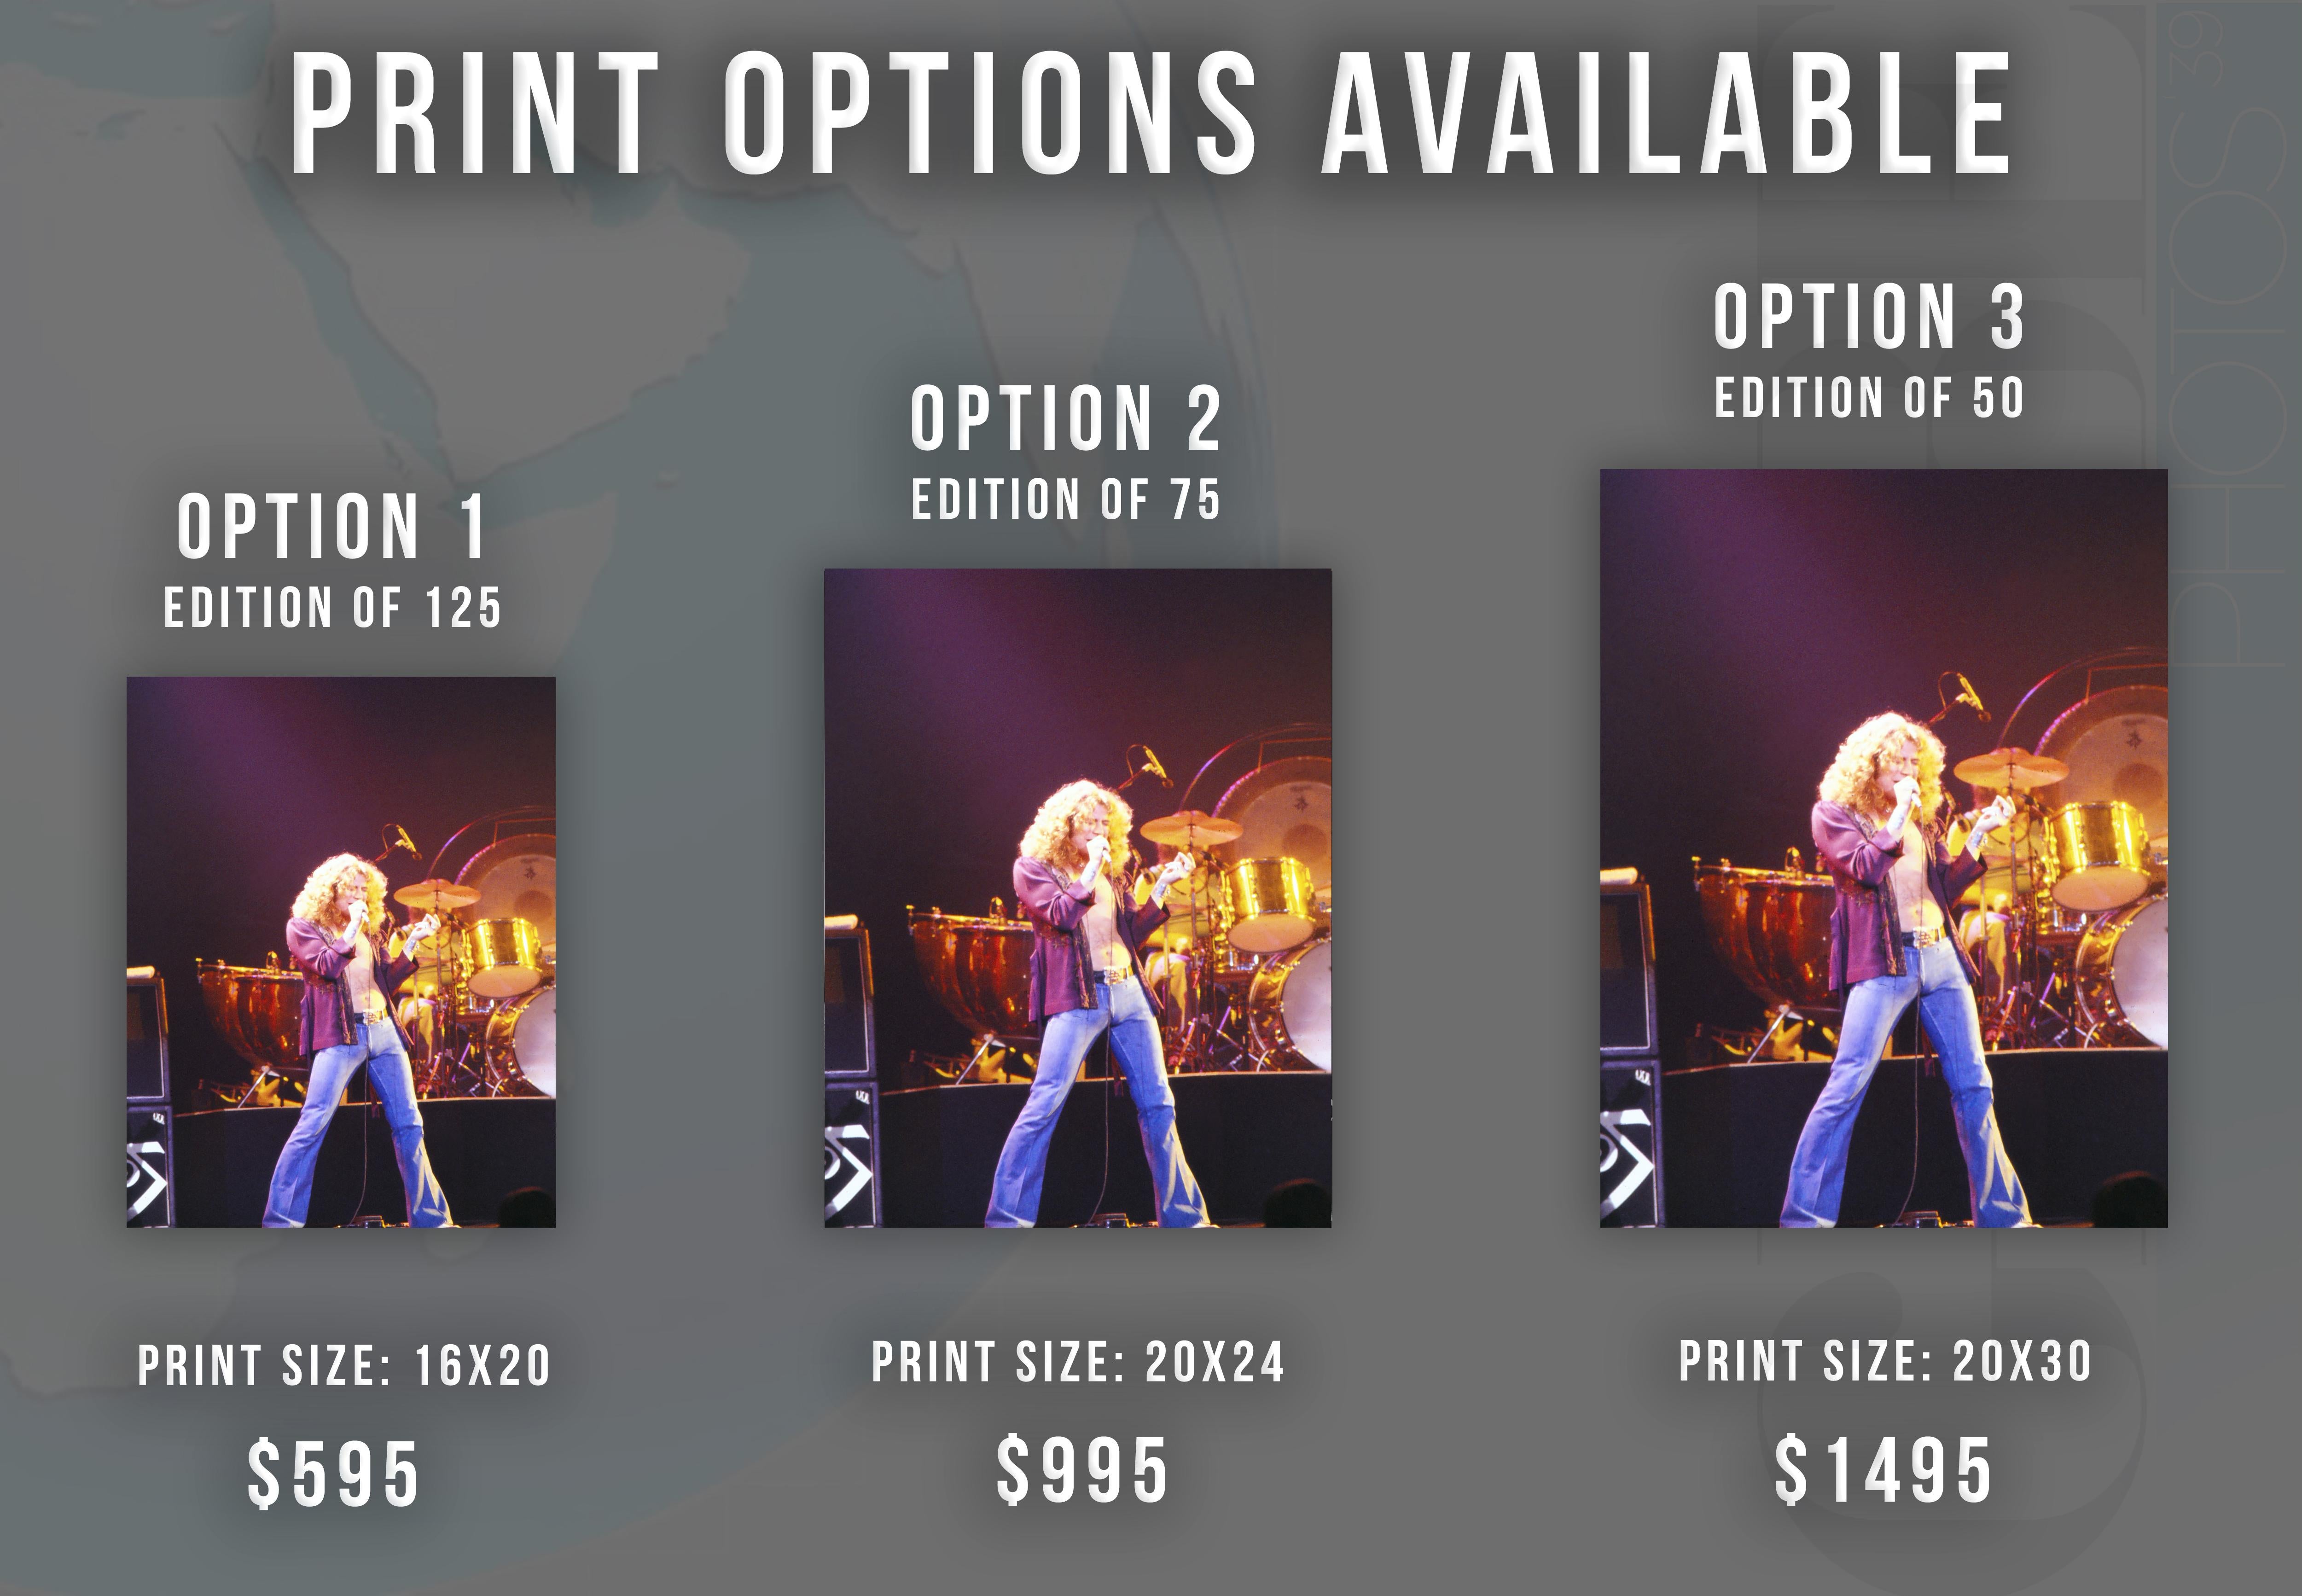 Robert Plant of Led Zeppelin Singing on Stage Fine Art Print - Photograph by David Woo